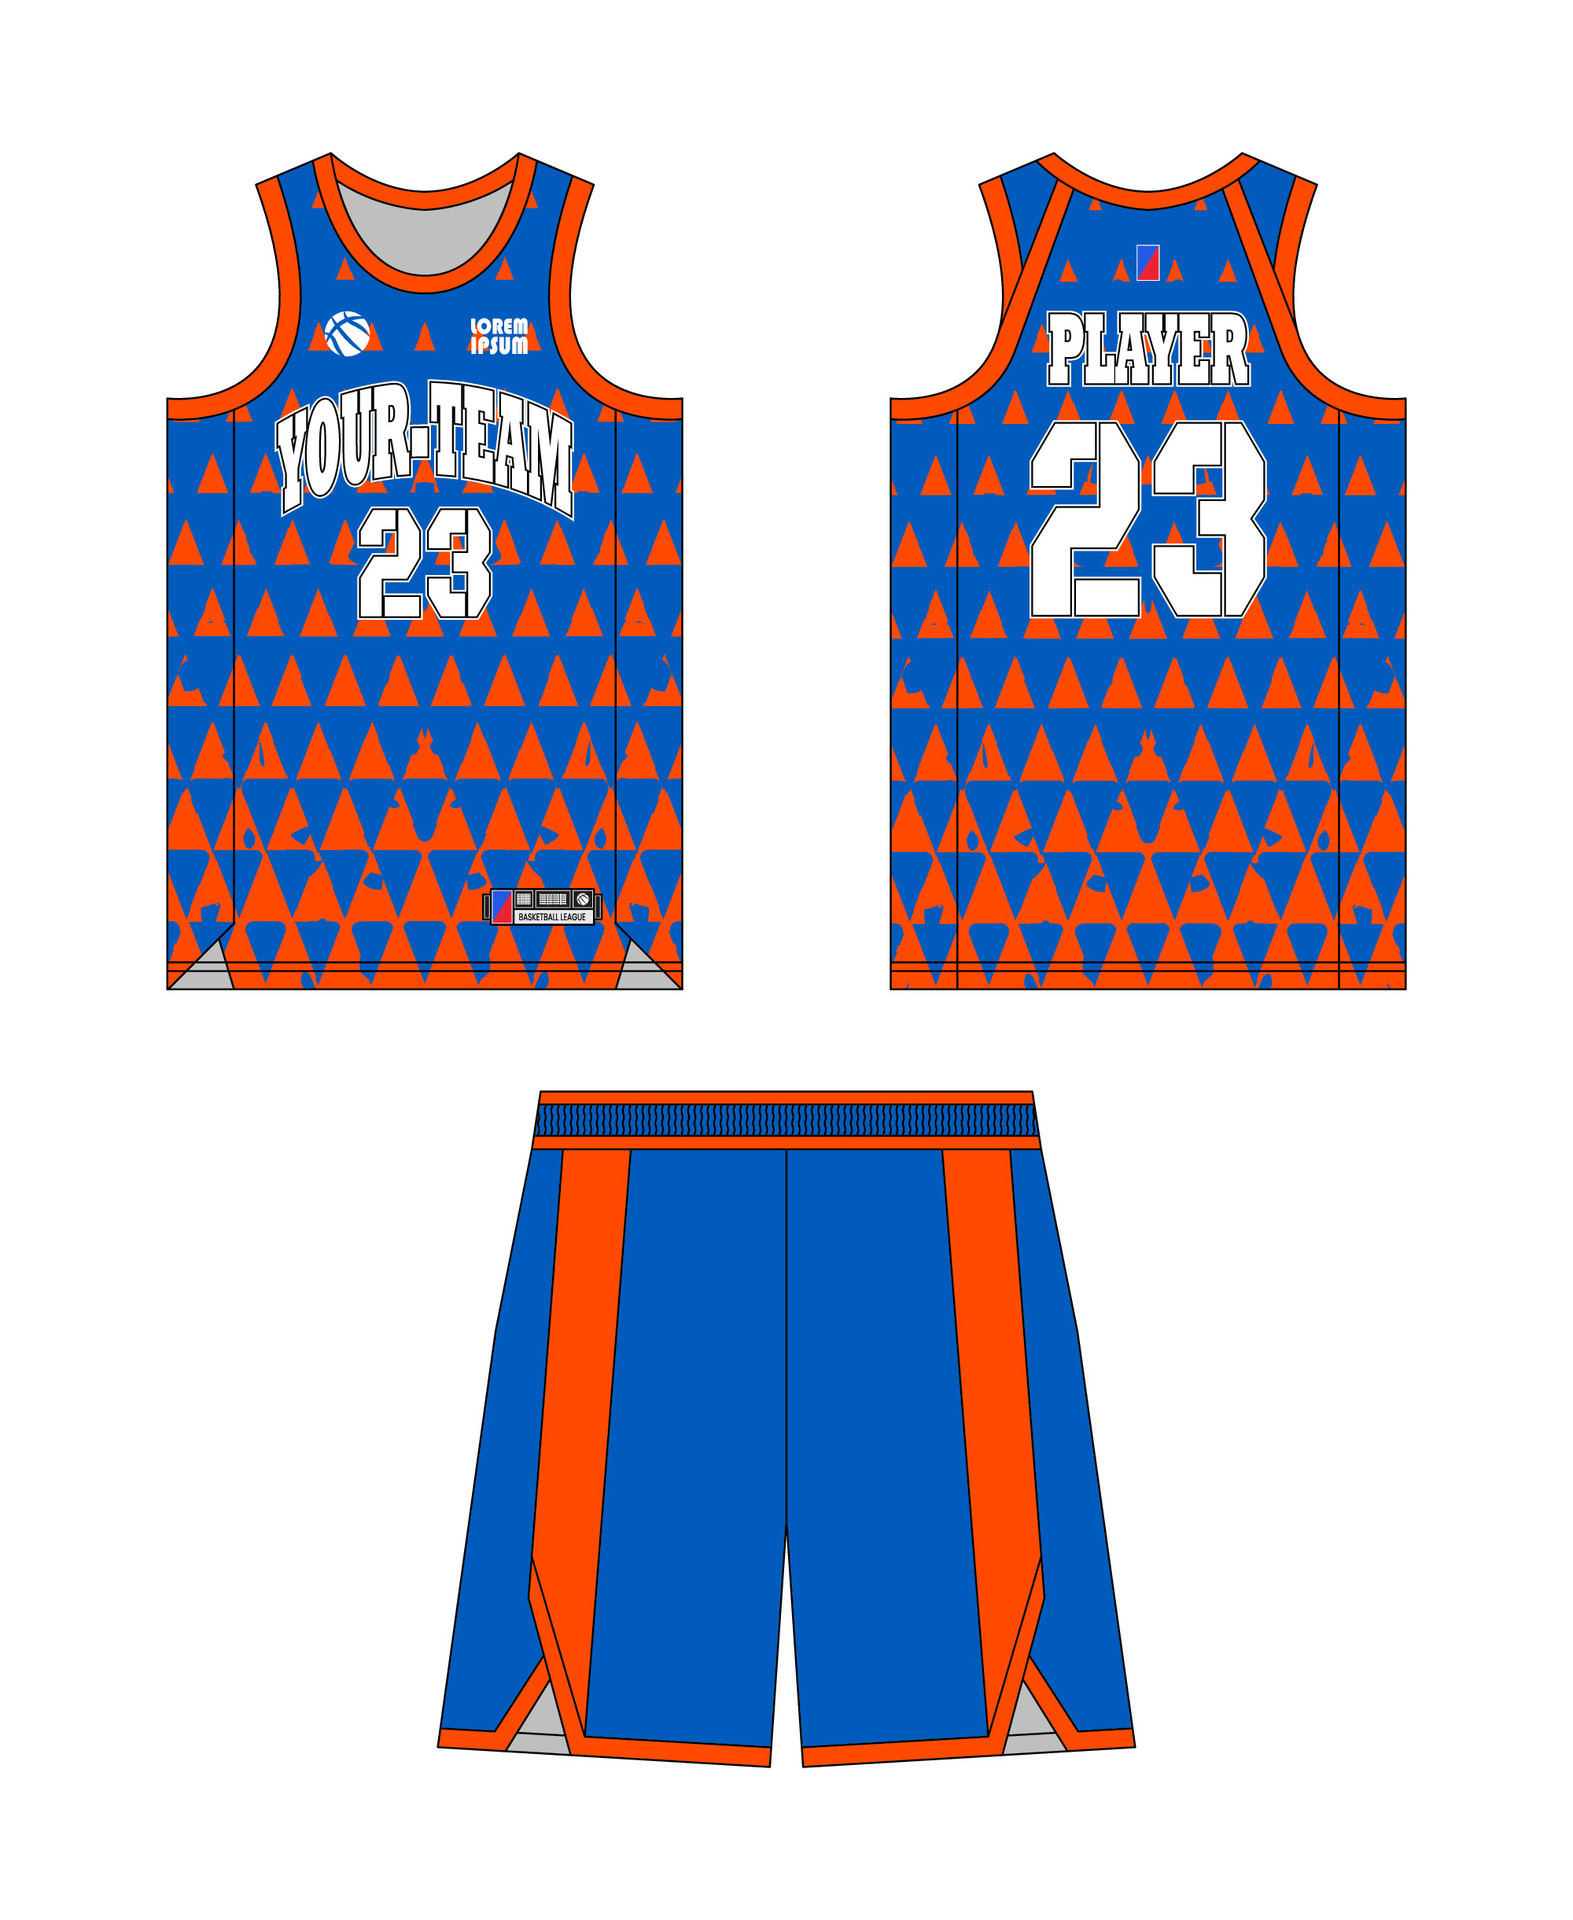 Premium Vector  Basketball jersey design and template for sublimation  printing